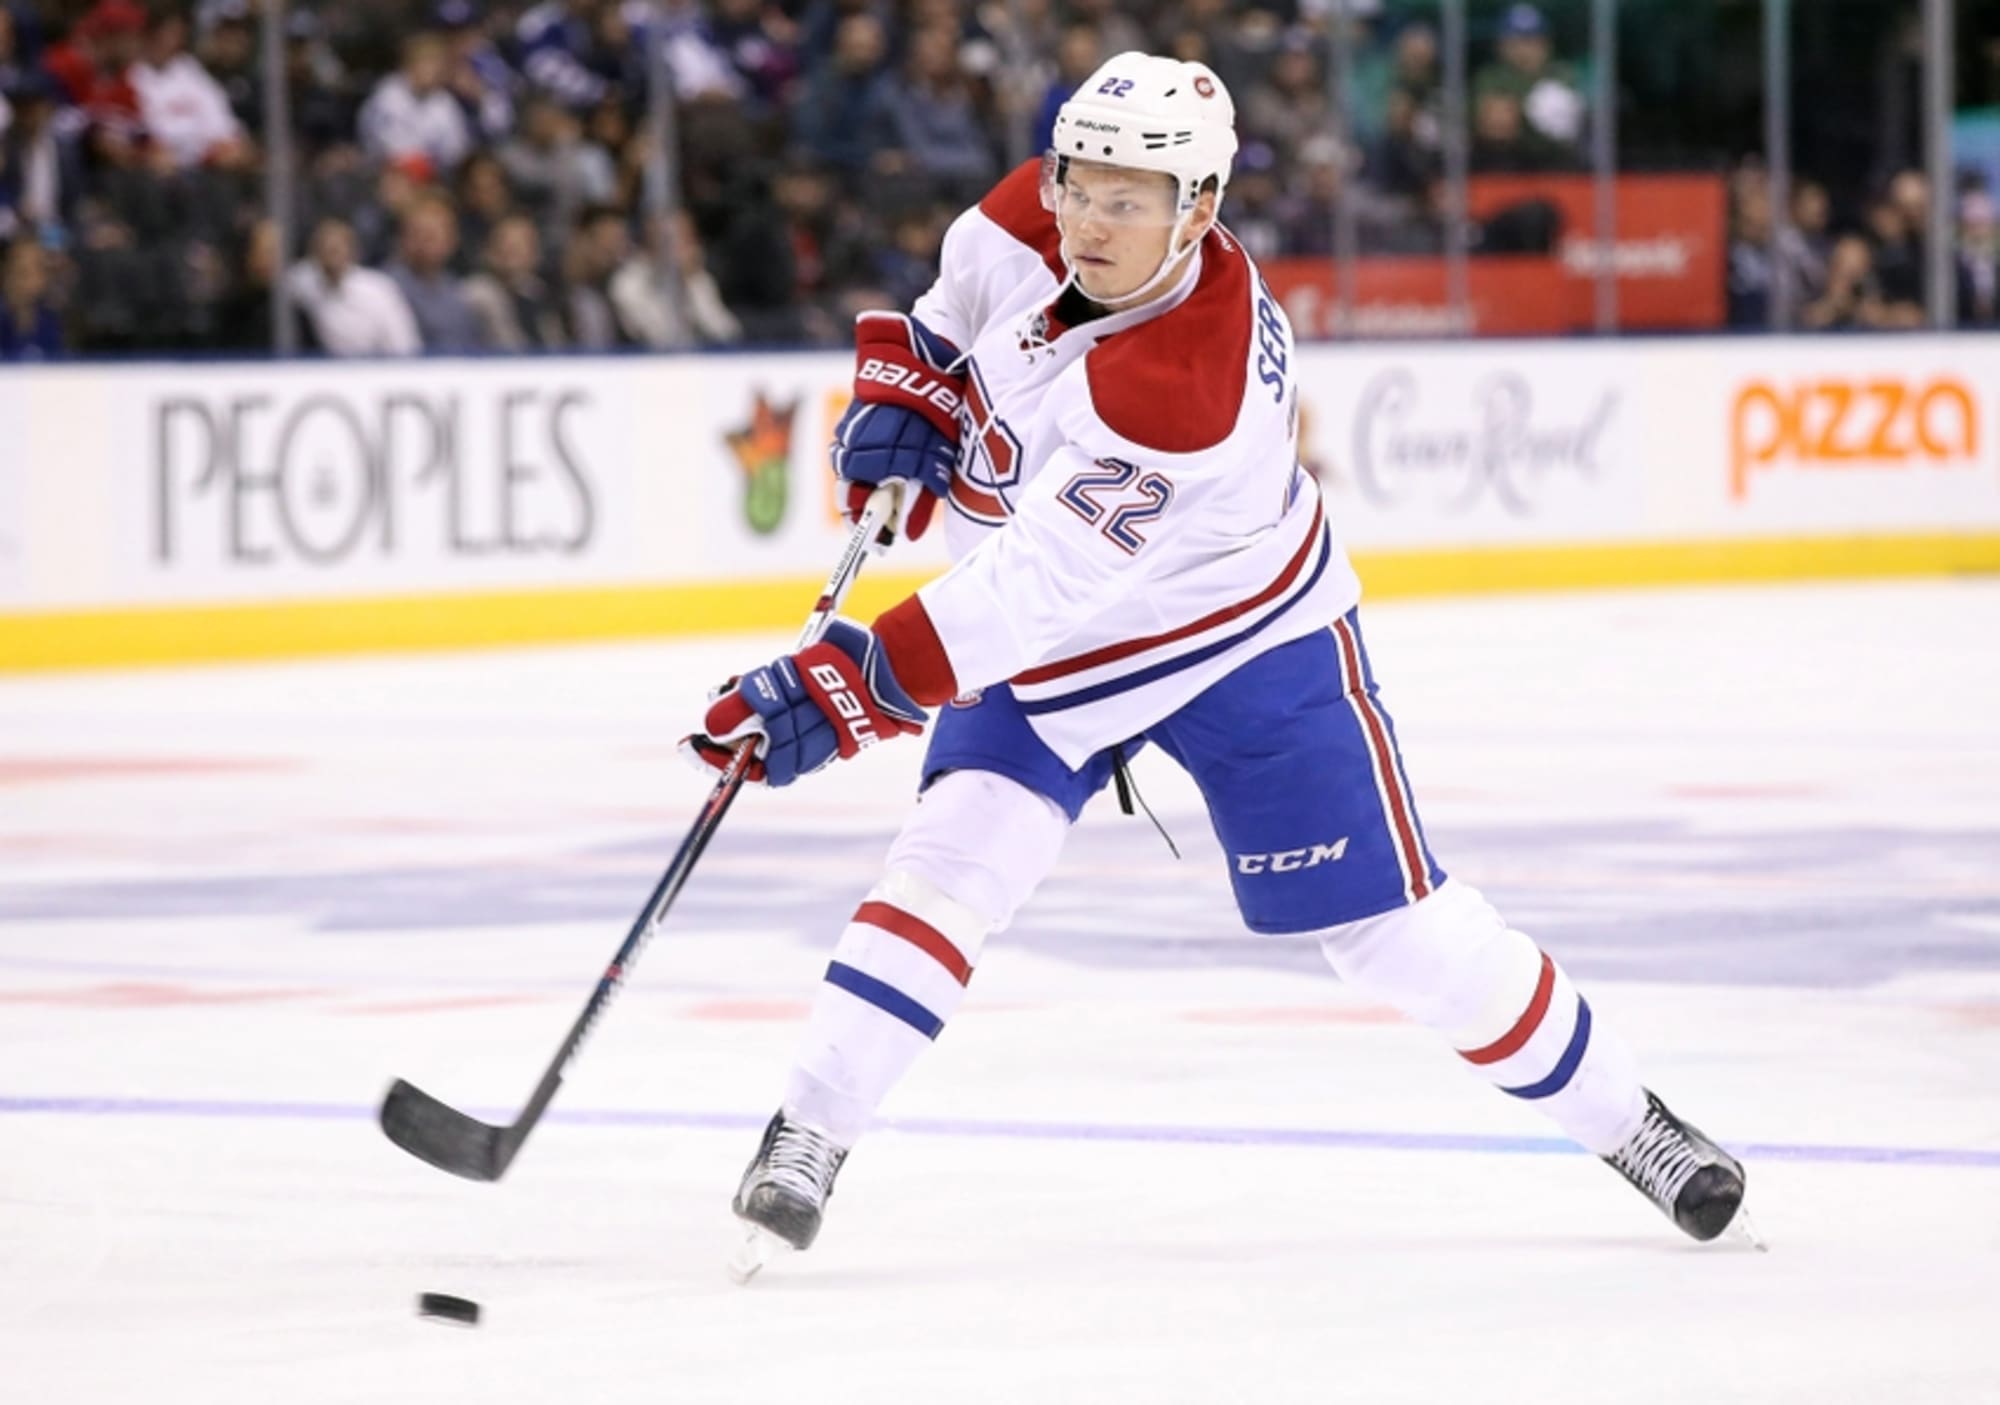 Mikhail Sergachev has more points than any current Canadiens